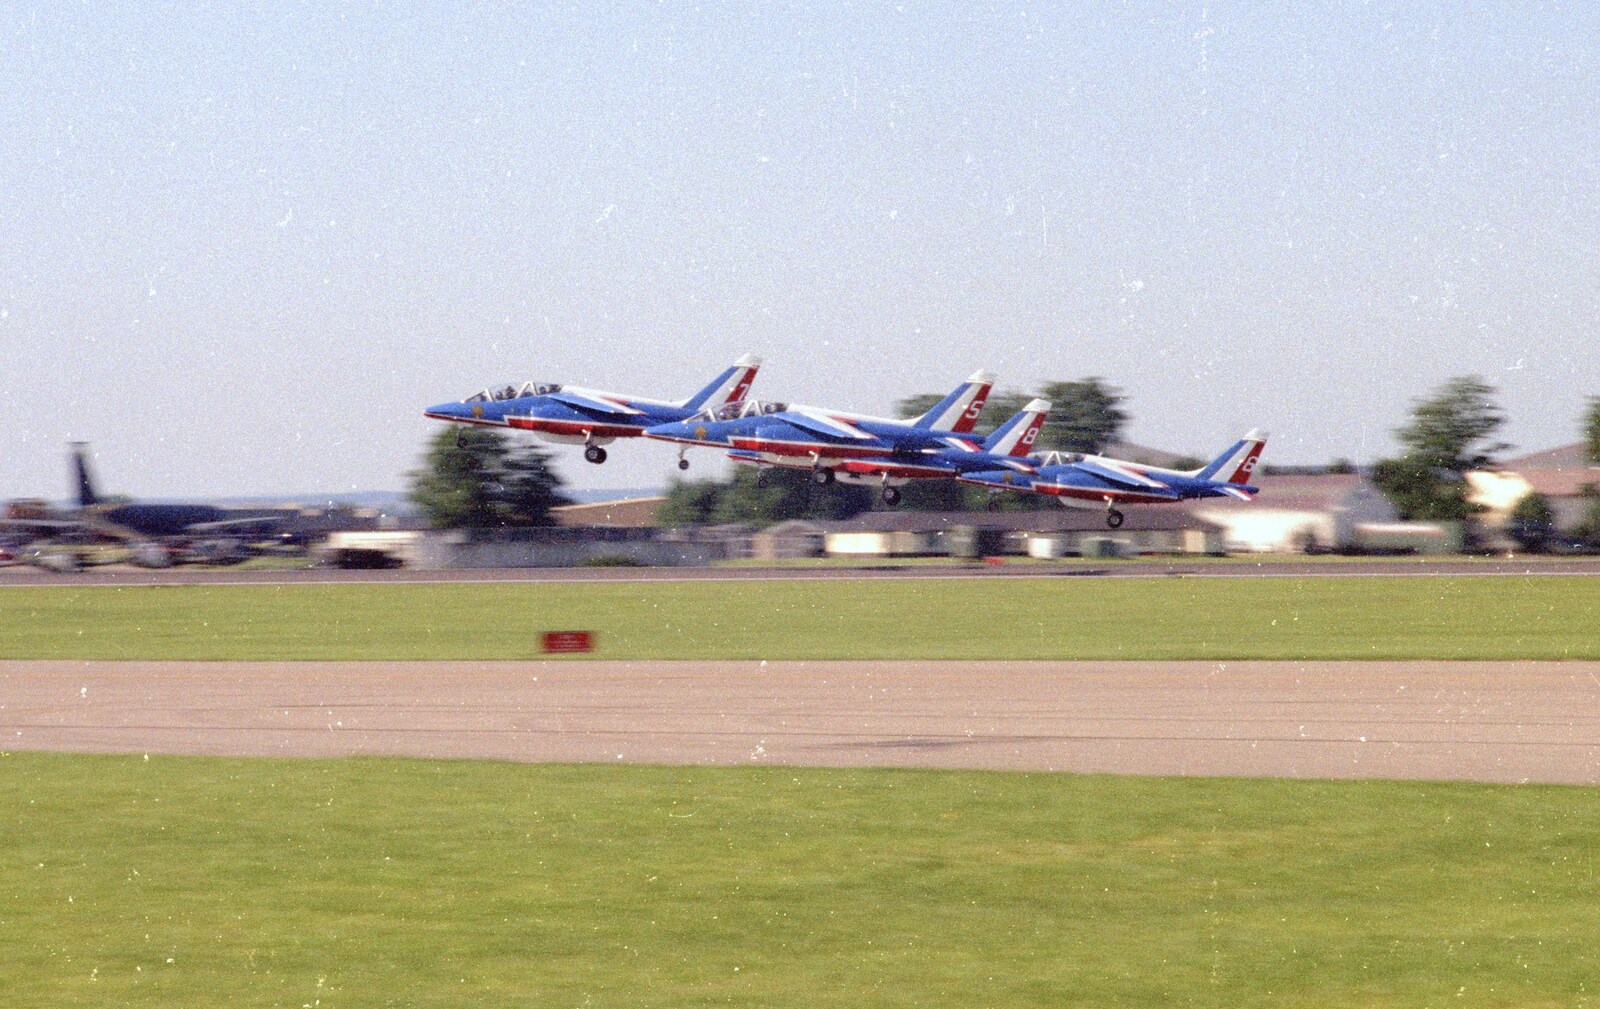 An acrobatic display team takes off from The Mildenhall Air Fete, Mildenhall, Suffolk - 29th May 1994